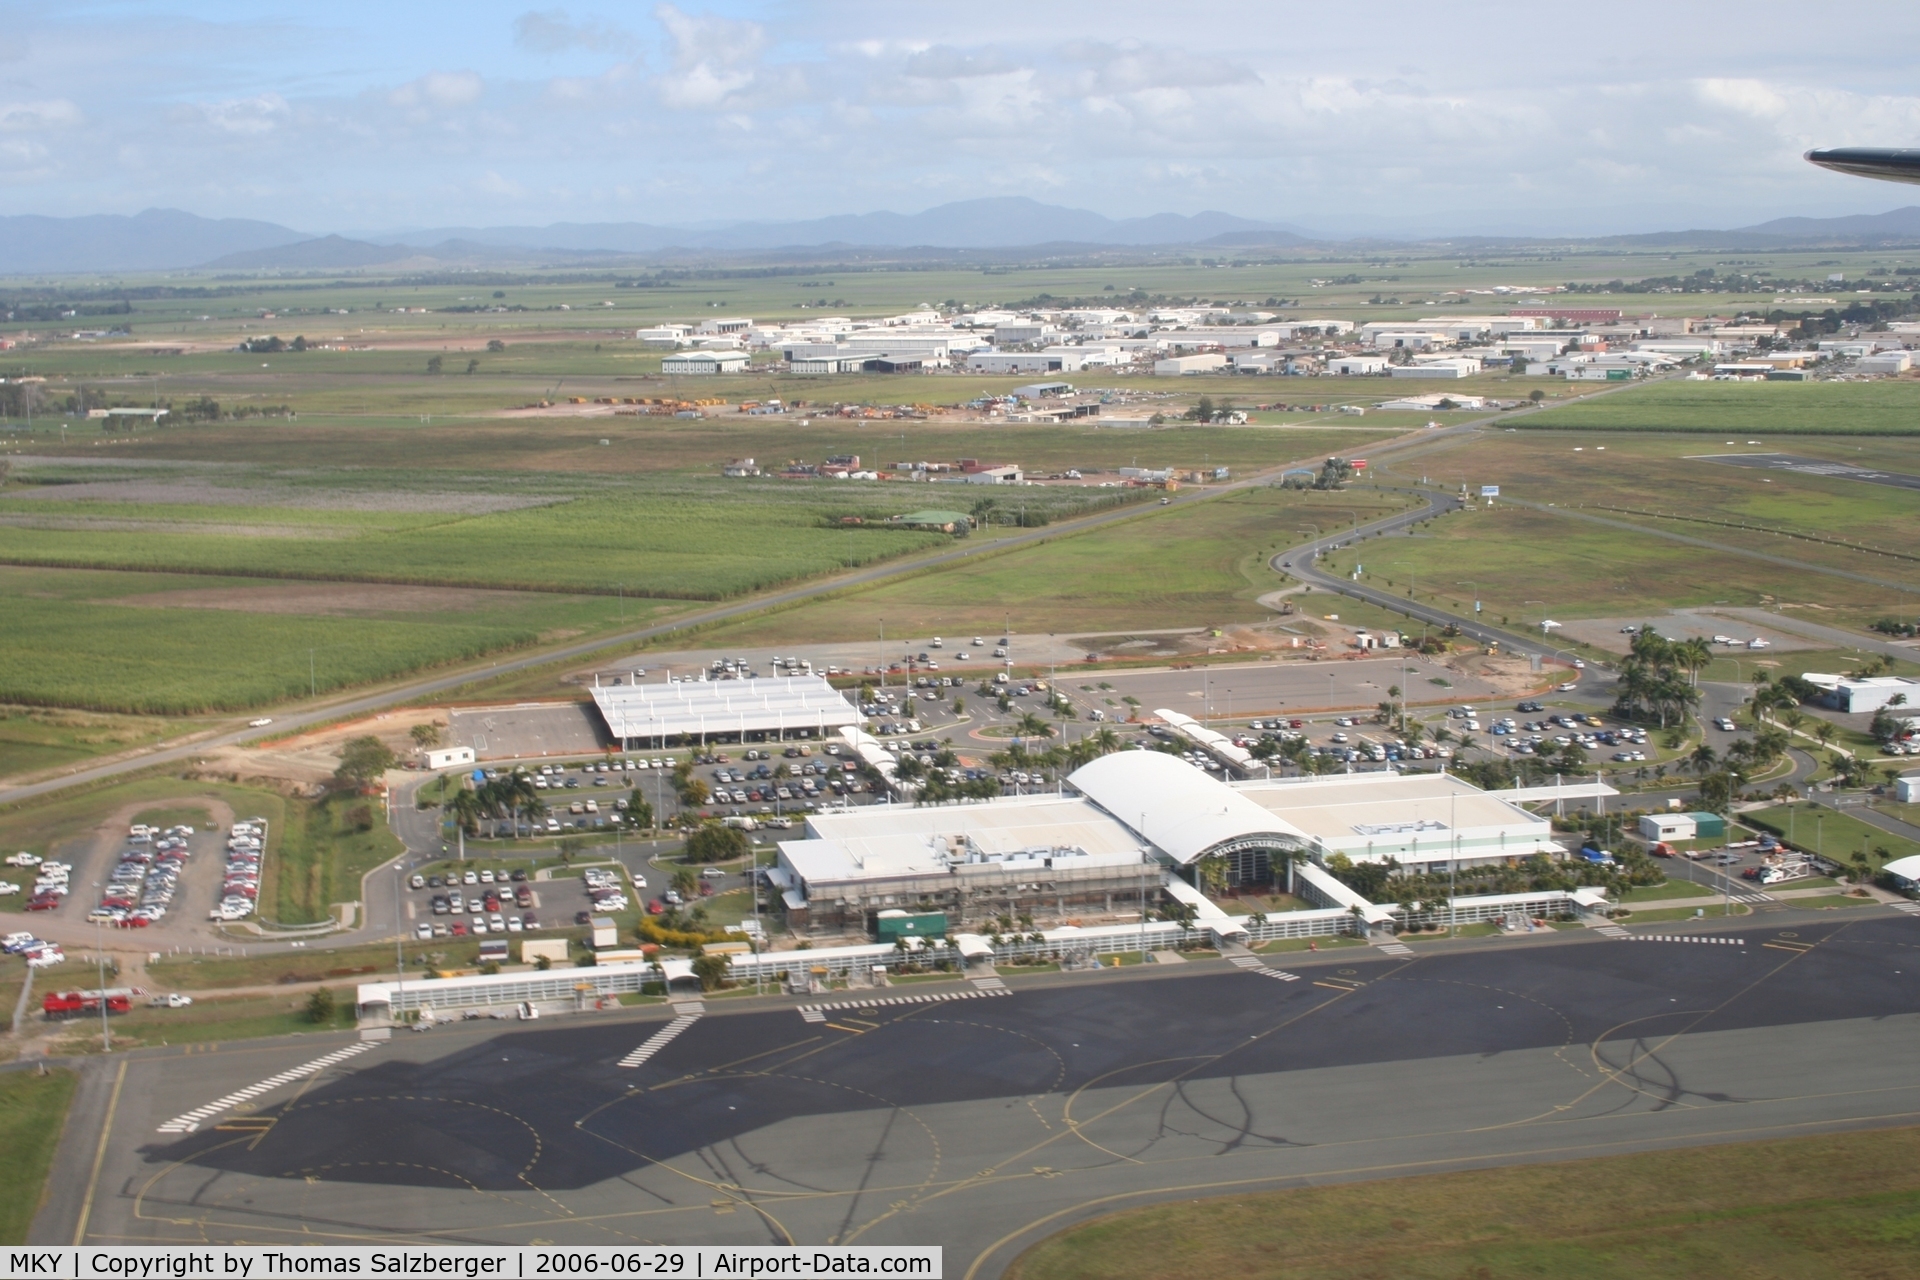 Marco Island Airport (MKY) - Mackay Airport Aerial view from departing aicraft